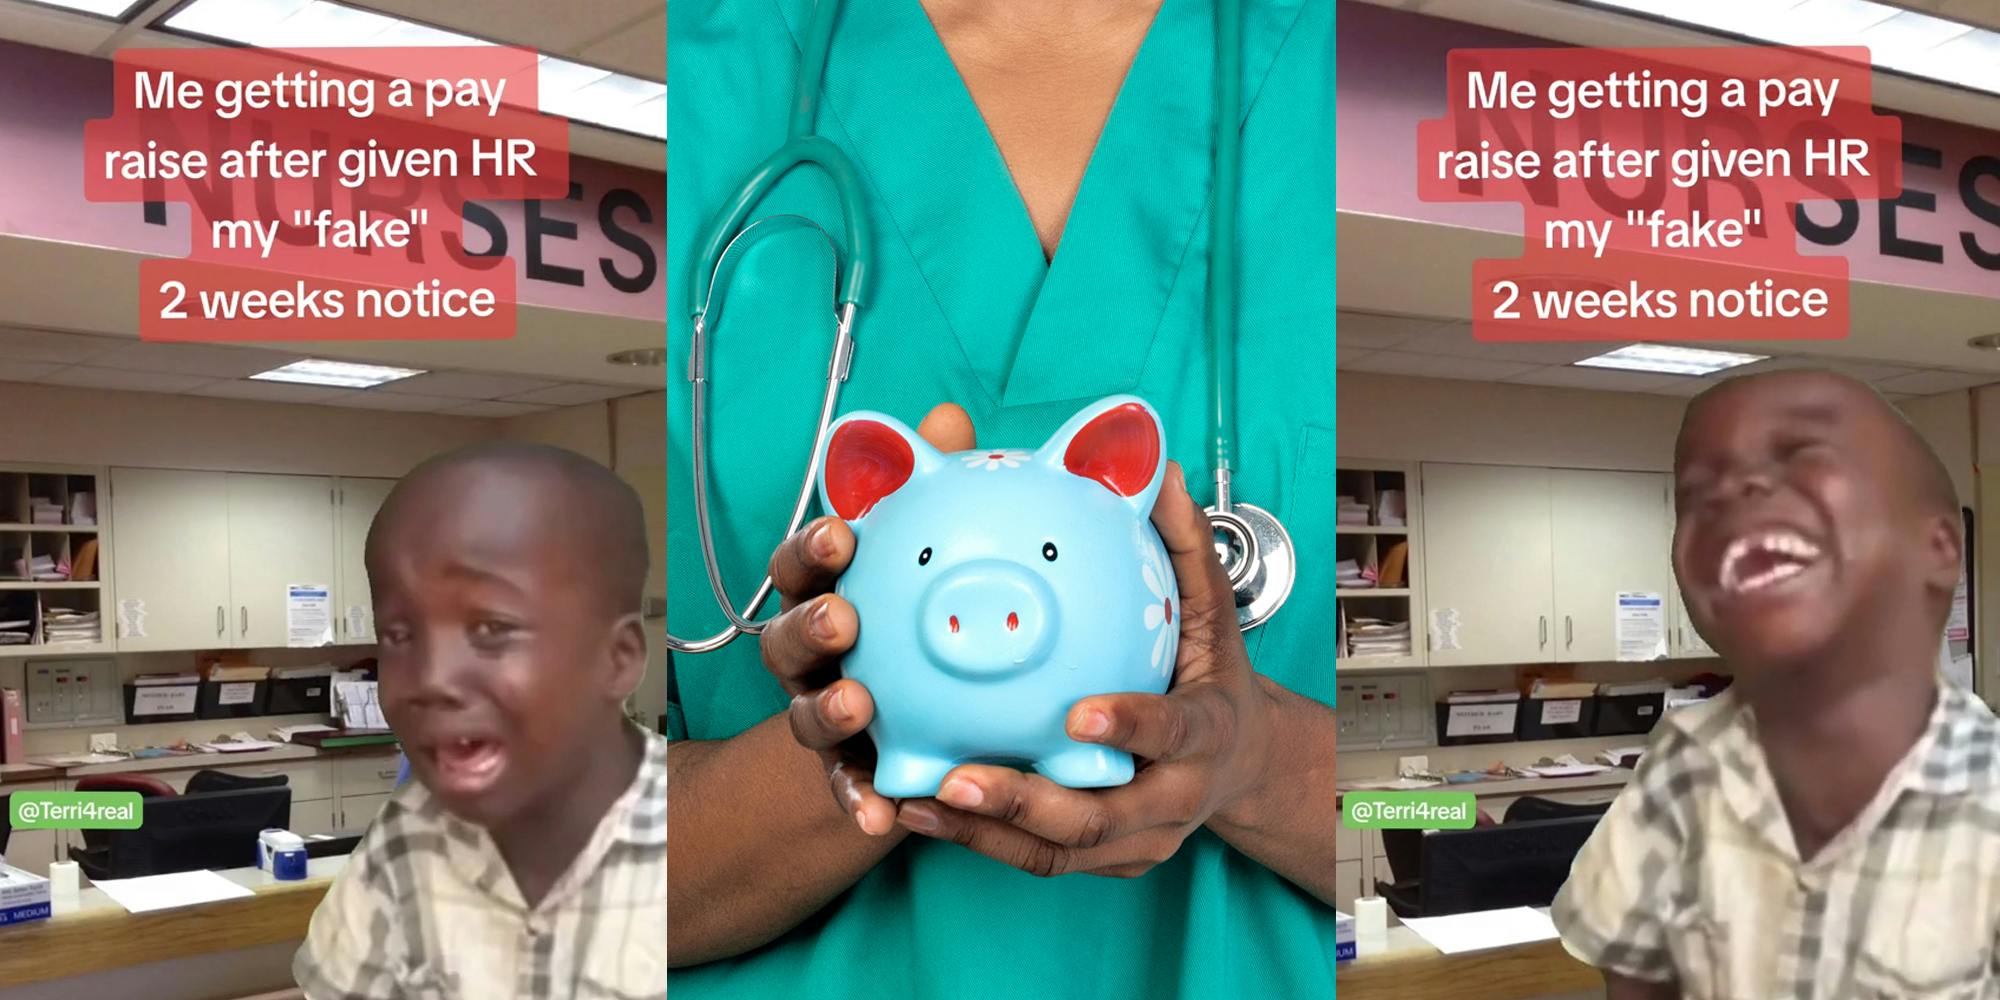 kid crying laughing meme greenscreen TikTok in front of image of NURSES sign in hospital with caption "Me getting a pay raise after given HR my "fake" 2 weeks notice" (l) nurse holding piggy bank (c) kid crying laughing meme greenscreen TikTok in front of image of NURSES sign in hospital with caption "Me getting a pay raise after given HR my "fake" 2 weeks notice" (r)